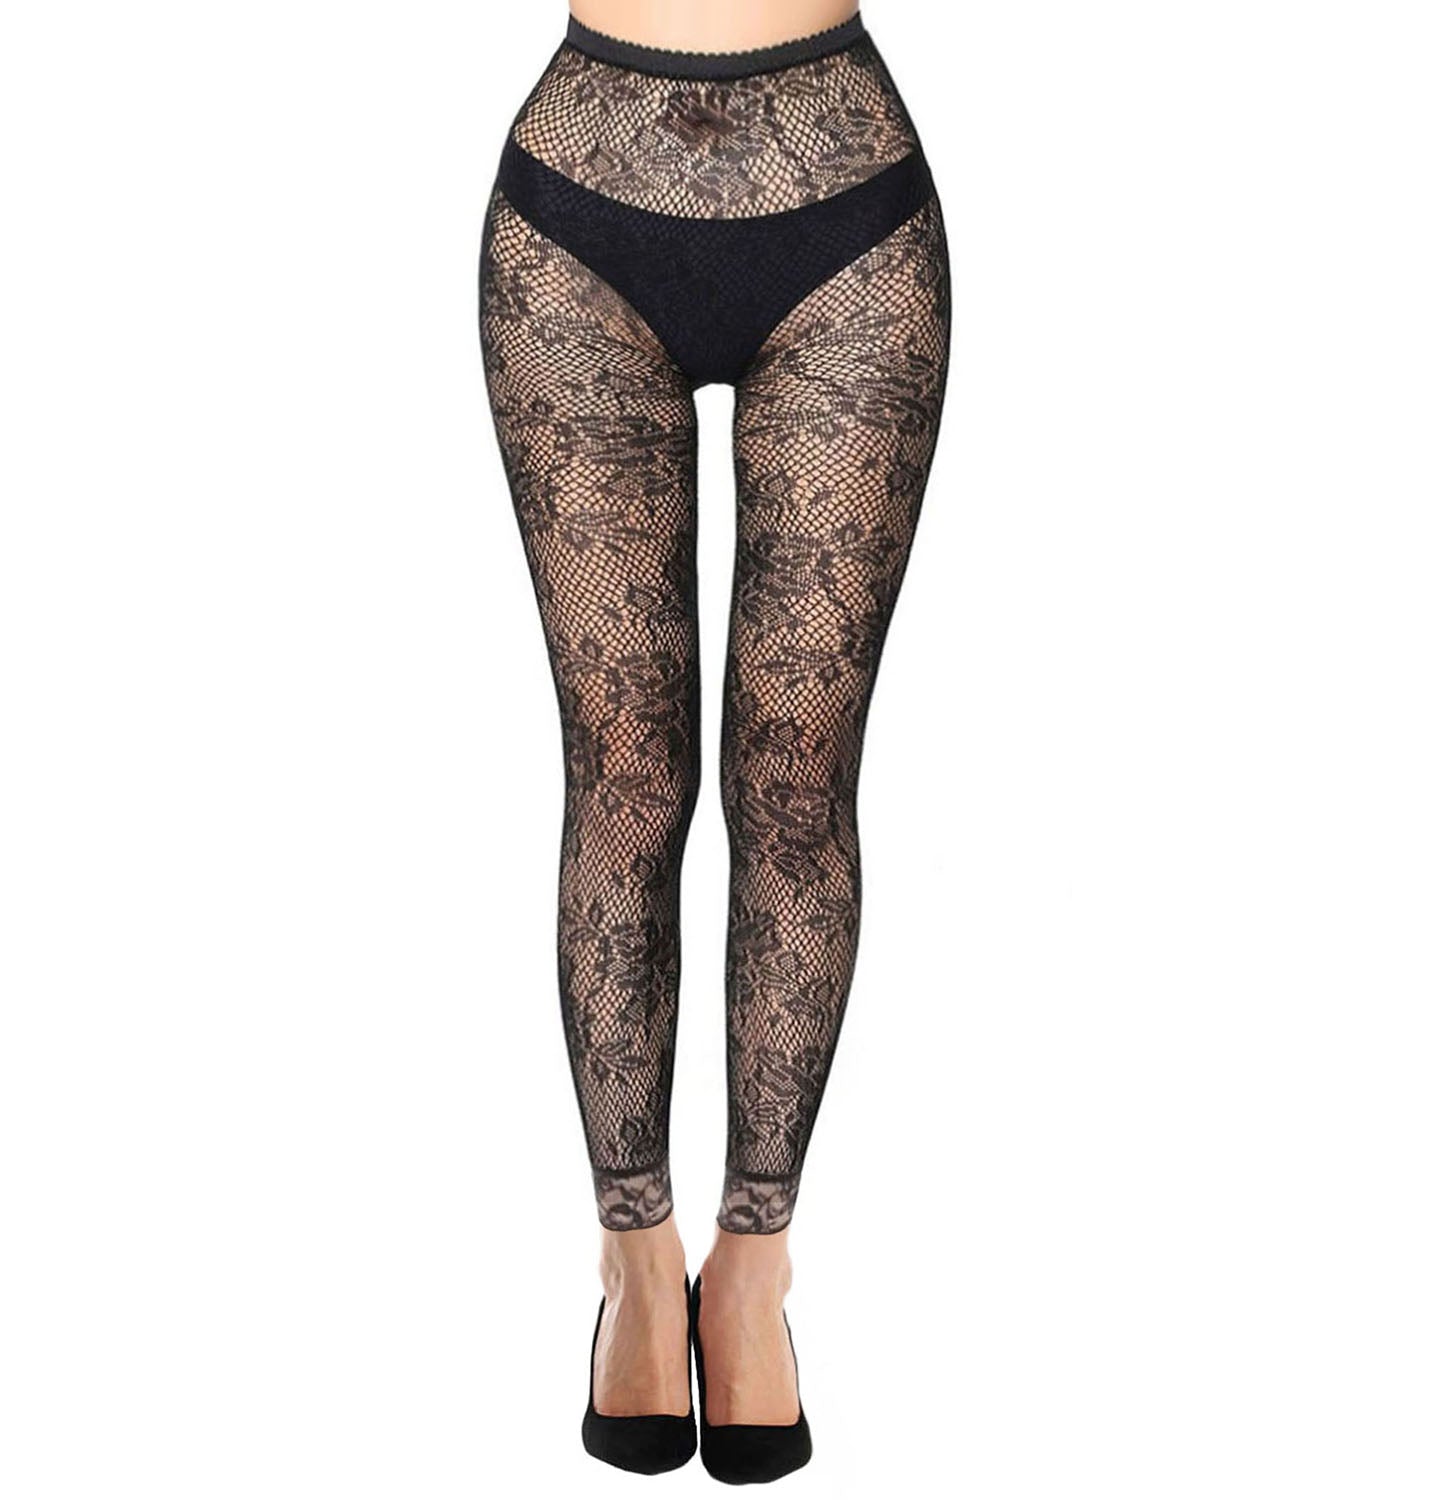 Simply Joshimo Rose Patterned Black Footless Fishnet Tights